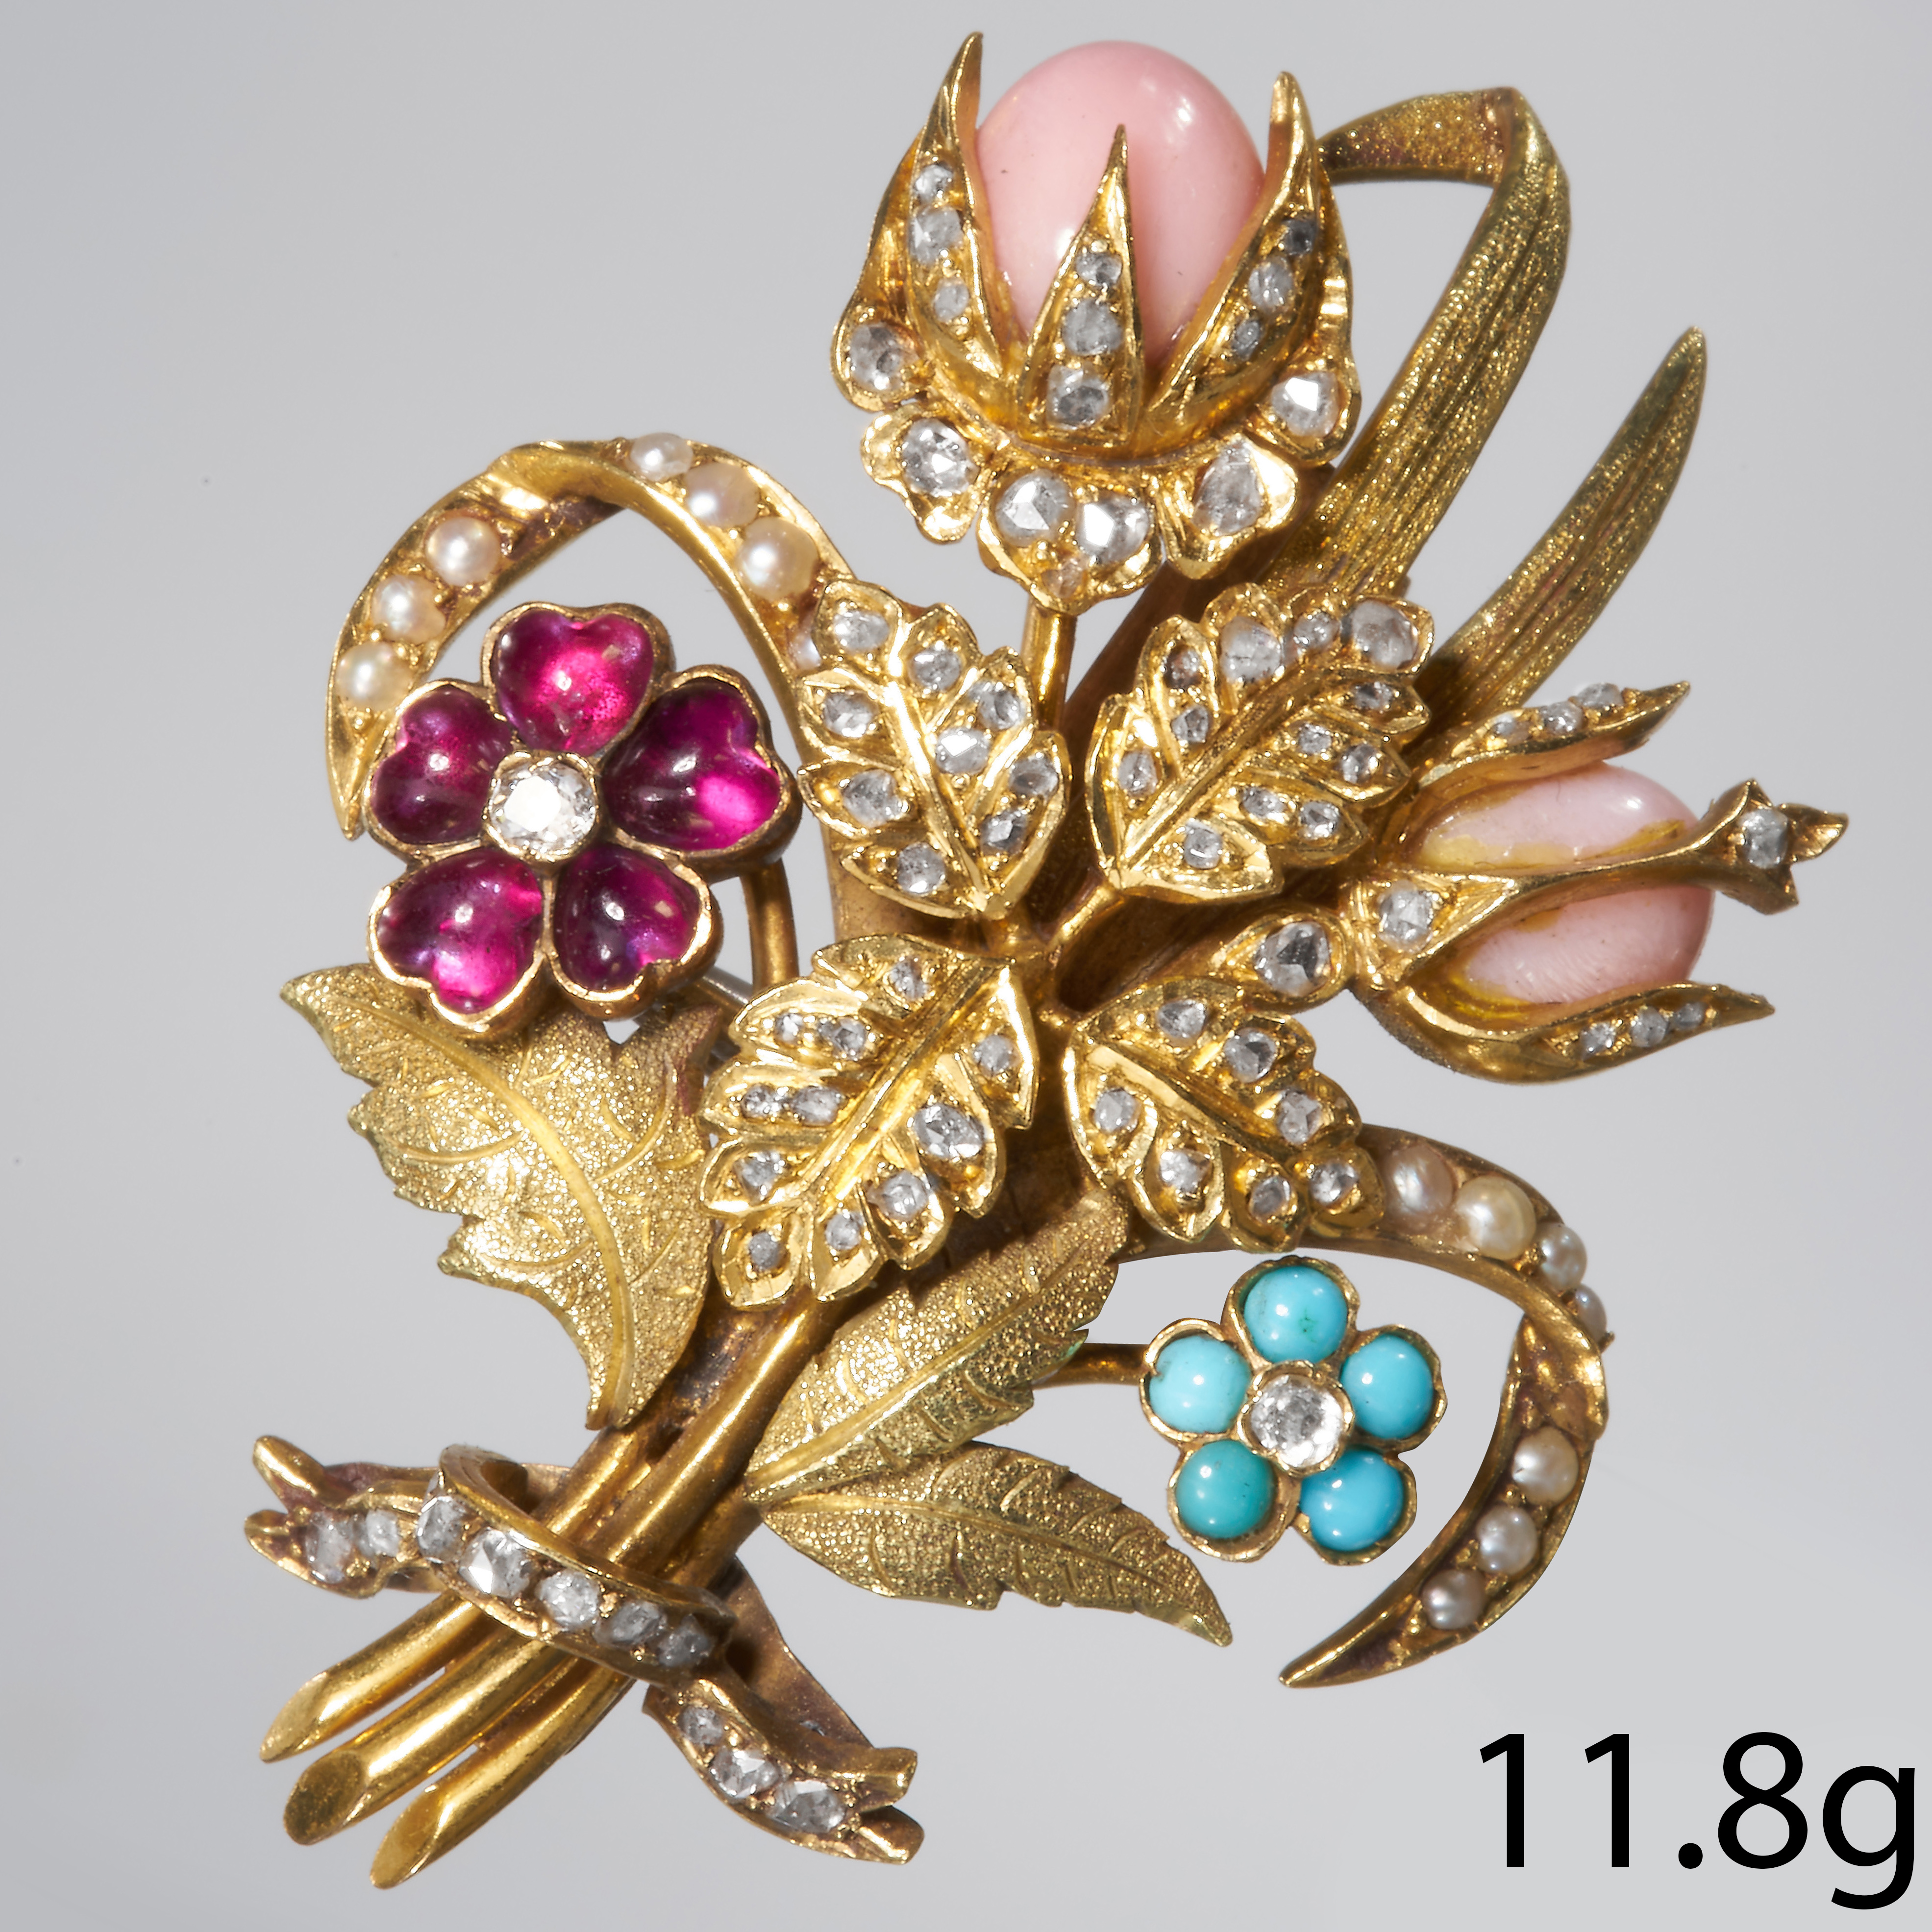 CONCH PEARLS, DIAMOND, TURQUOISE, TOURMALINE AND SEED PEARL FLORAL BROOCH.